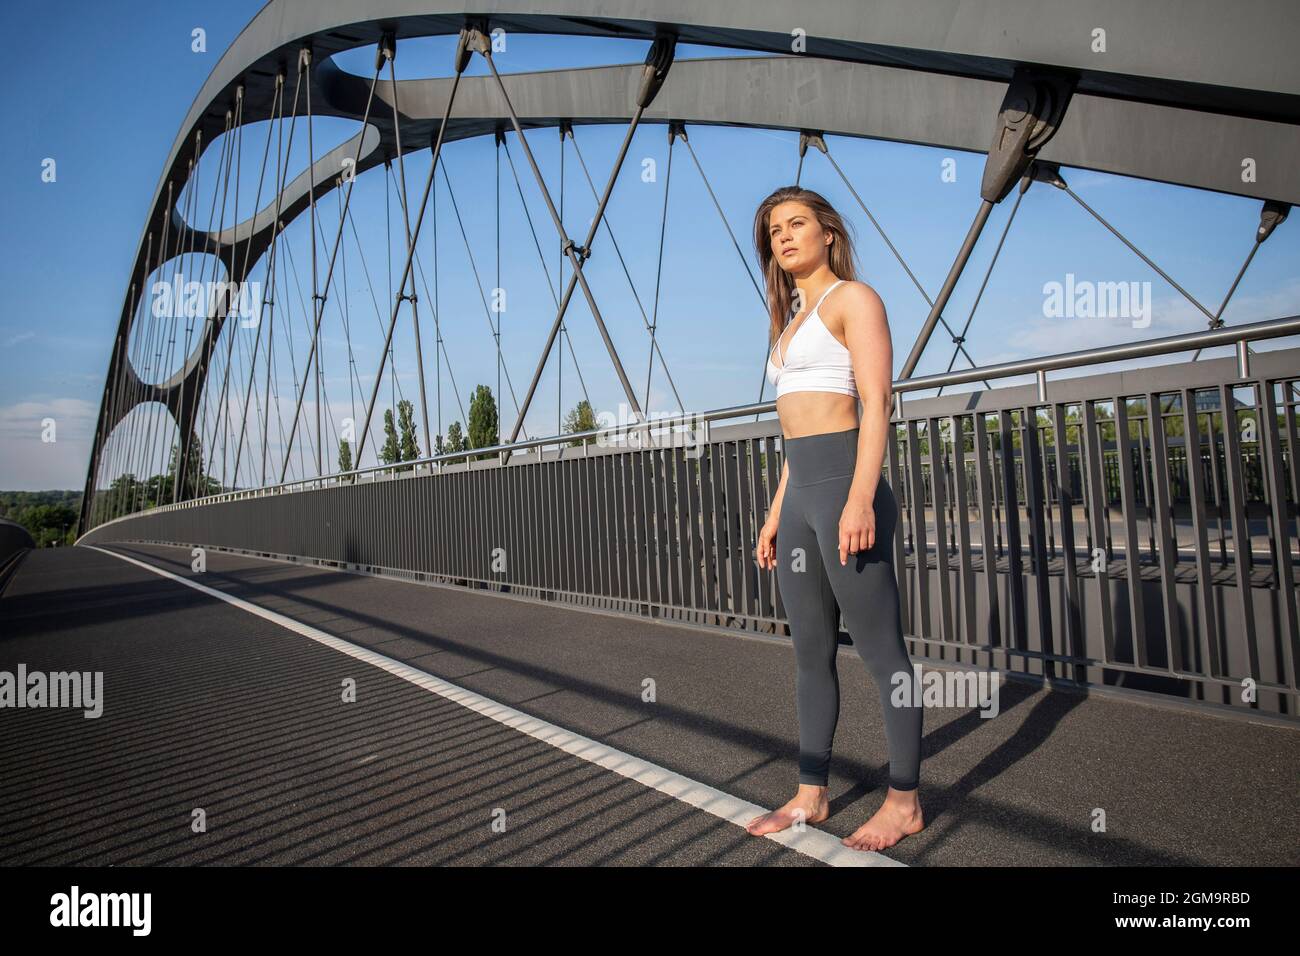 Young woman in yoga outfit on city street during sunny day in Frankfurt am Main, Hessen, Germany. Stock Photo